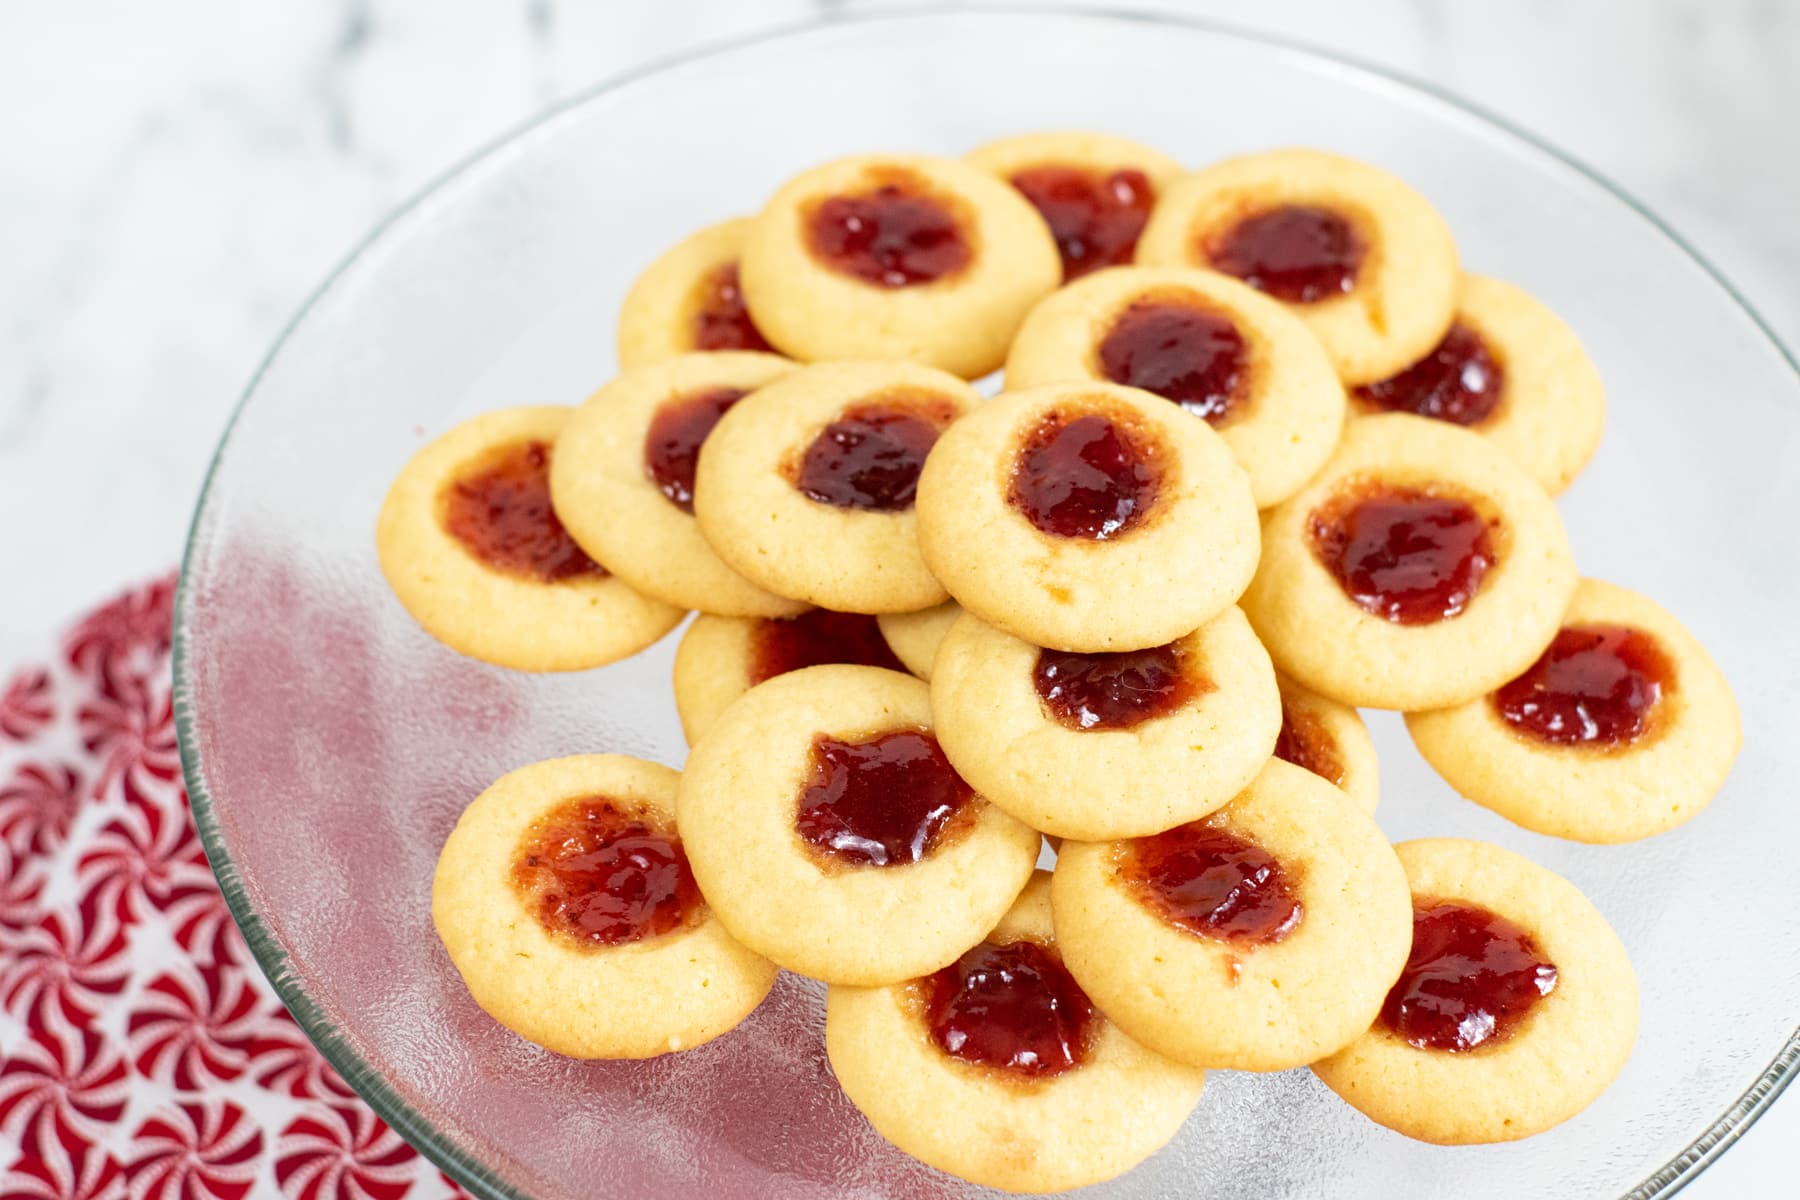 Bite sized Strawberry Thumbprint Cookies on a glass plate